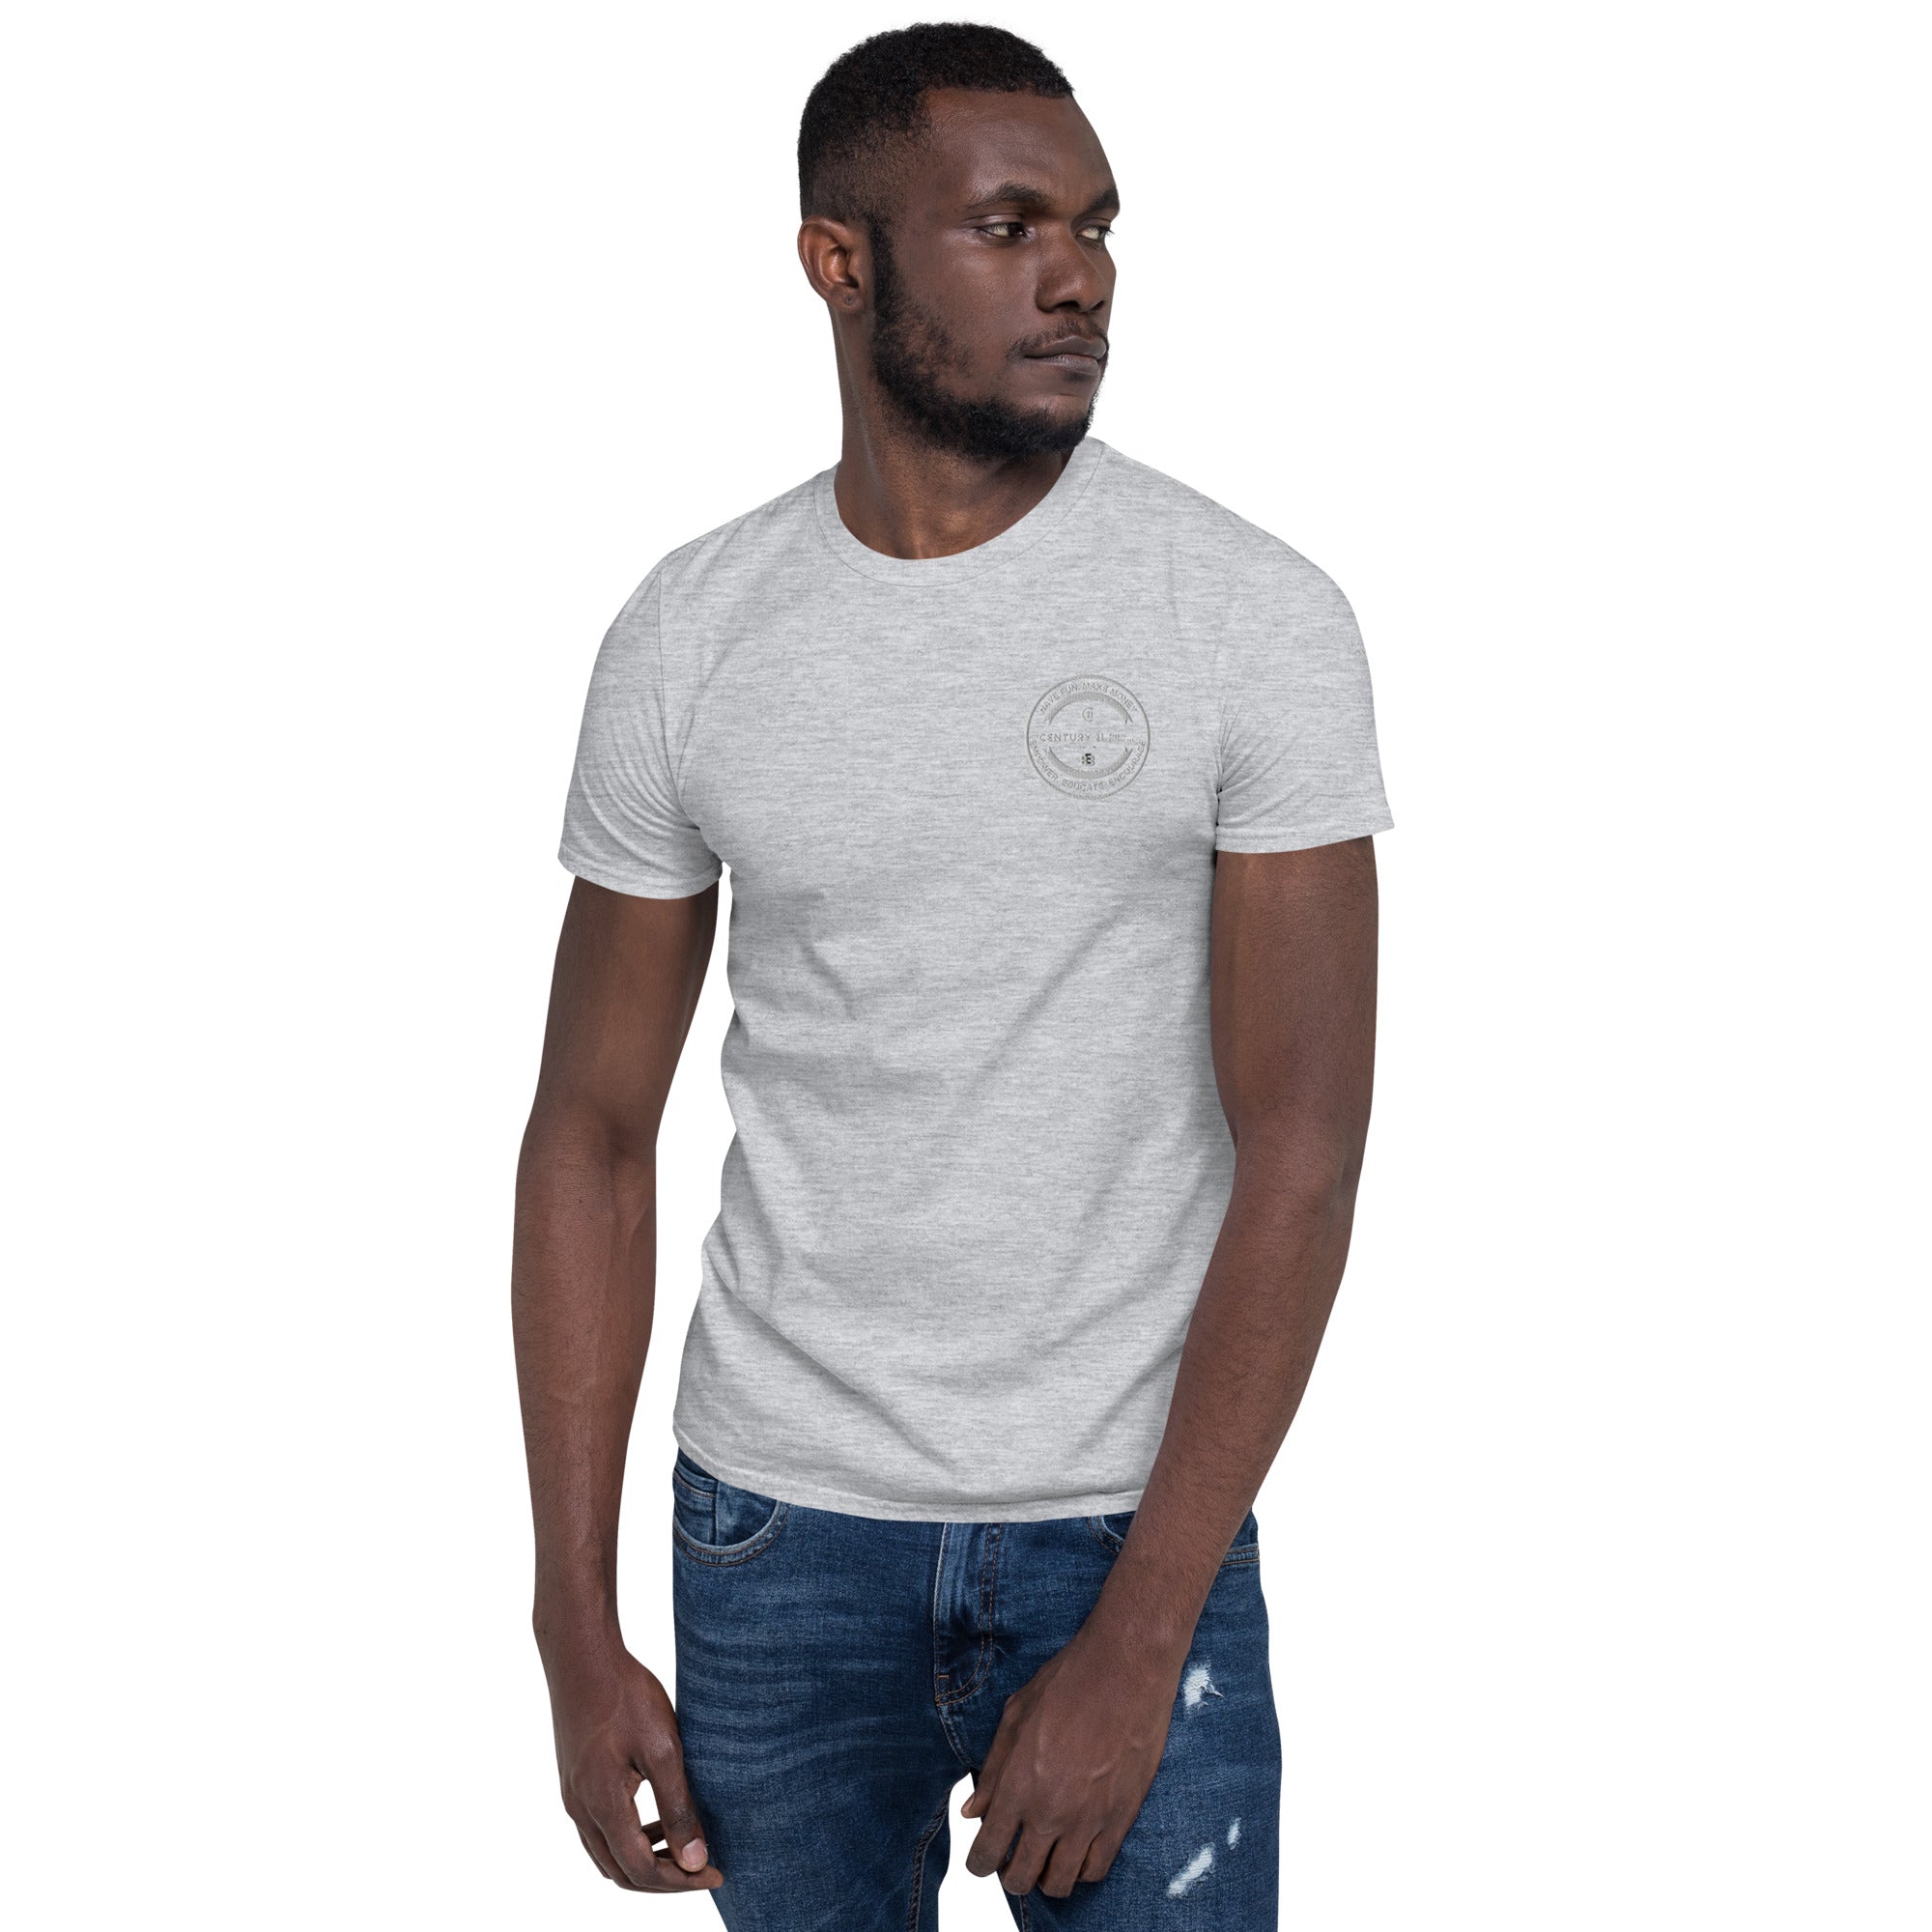 C21 Beggins Embroidered Cirlce Seal Short-Sleeve T-Shirt